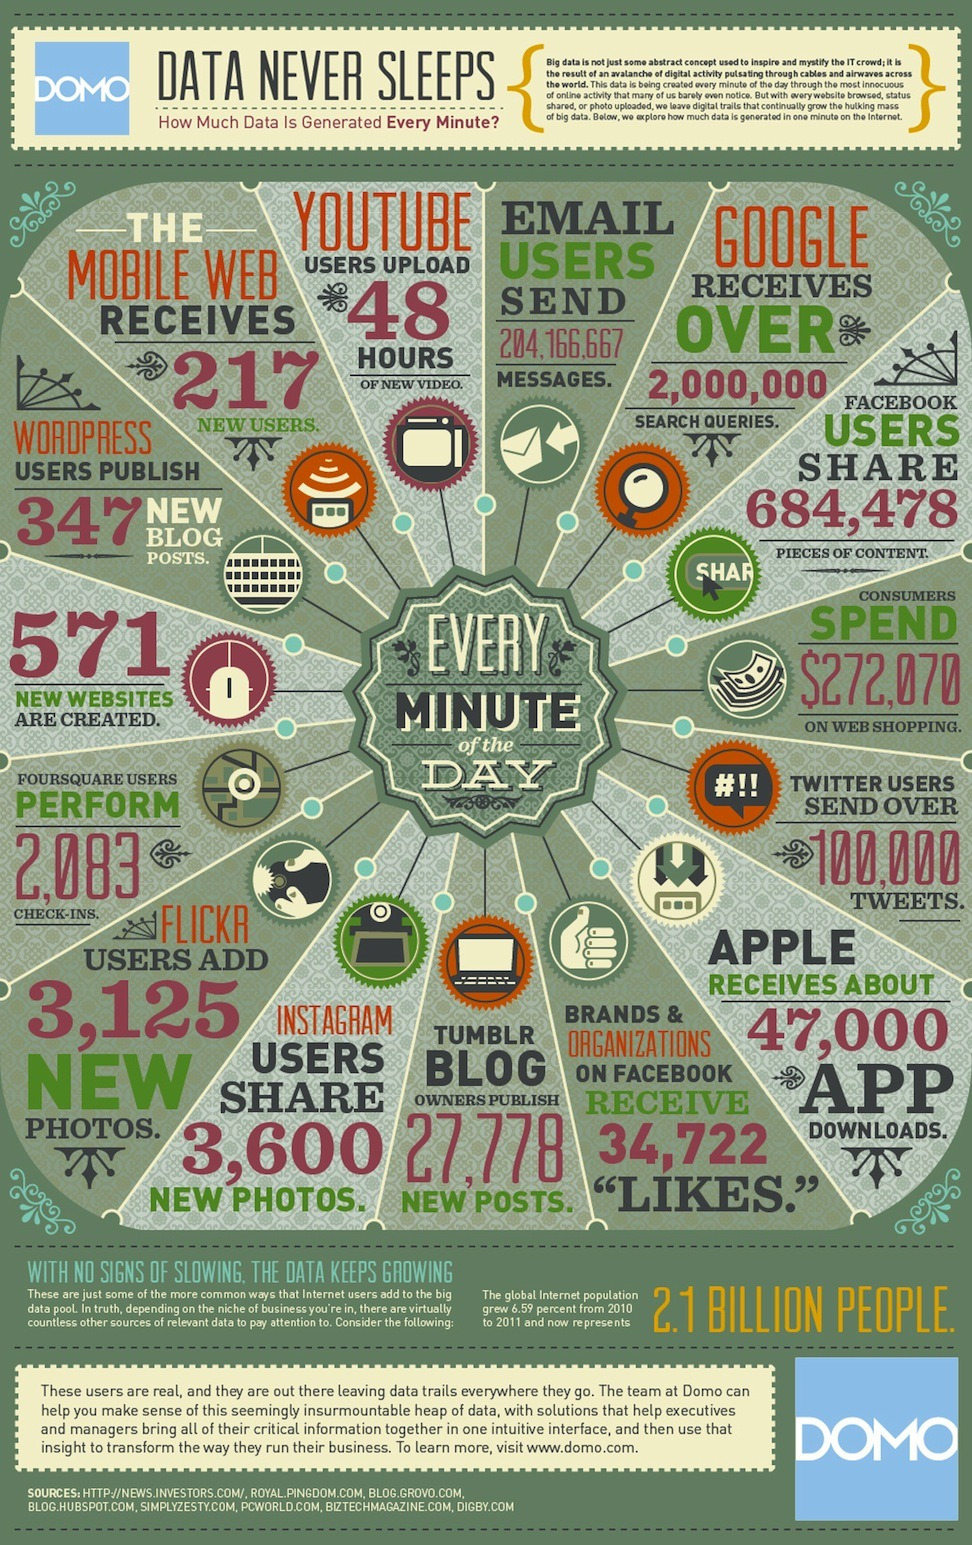 What happens on the web every minute